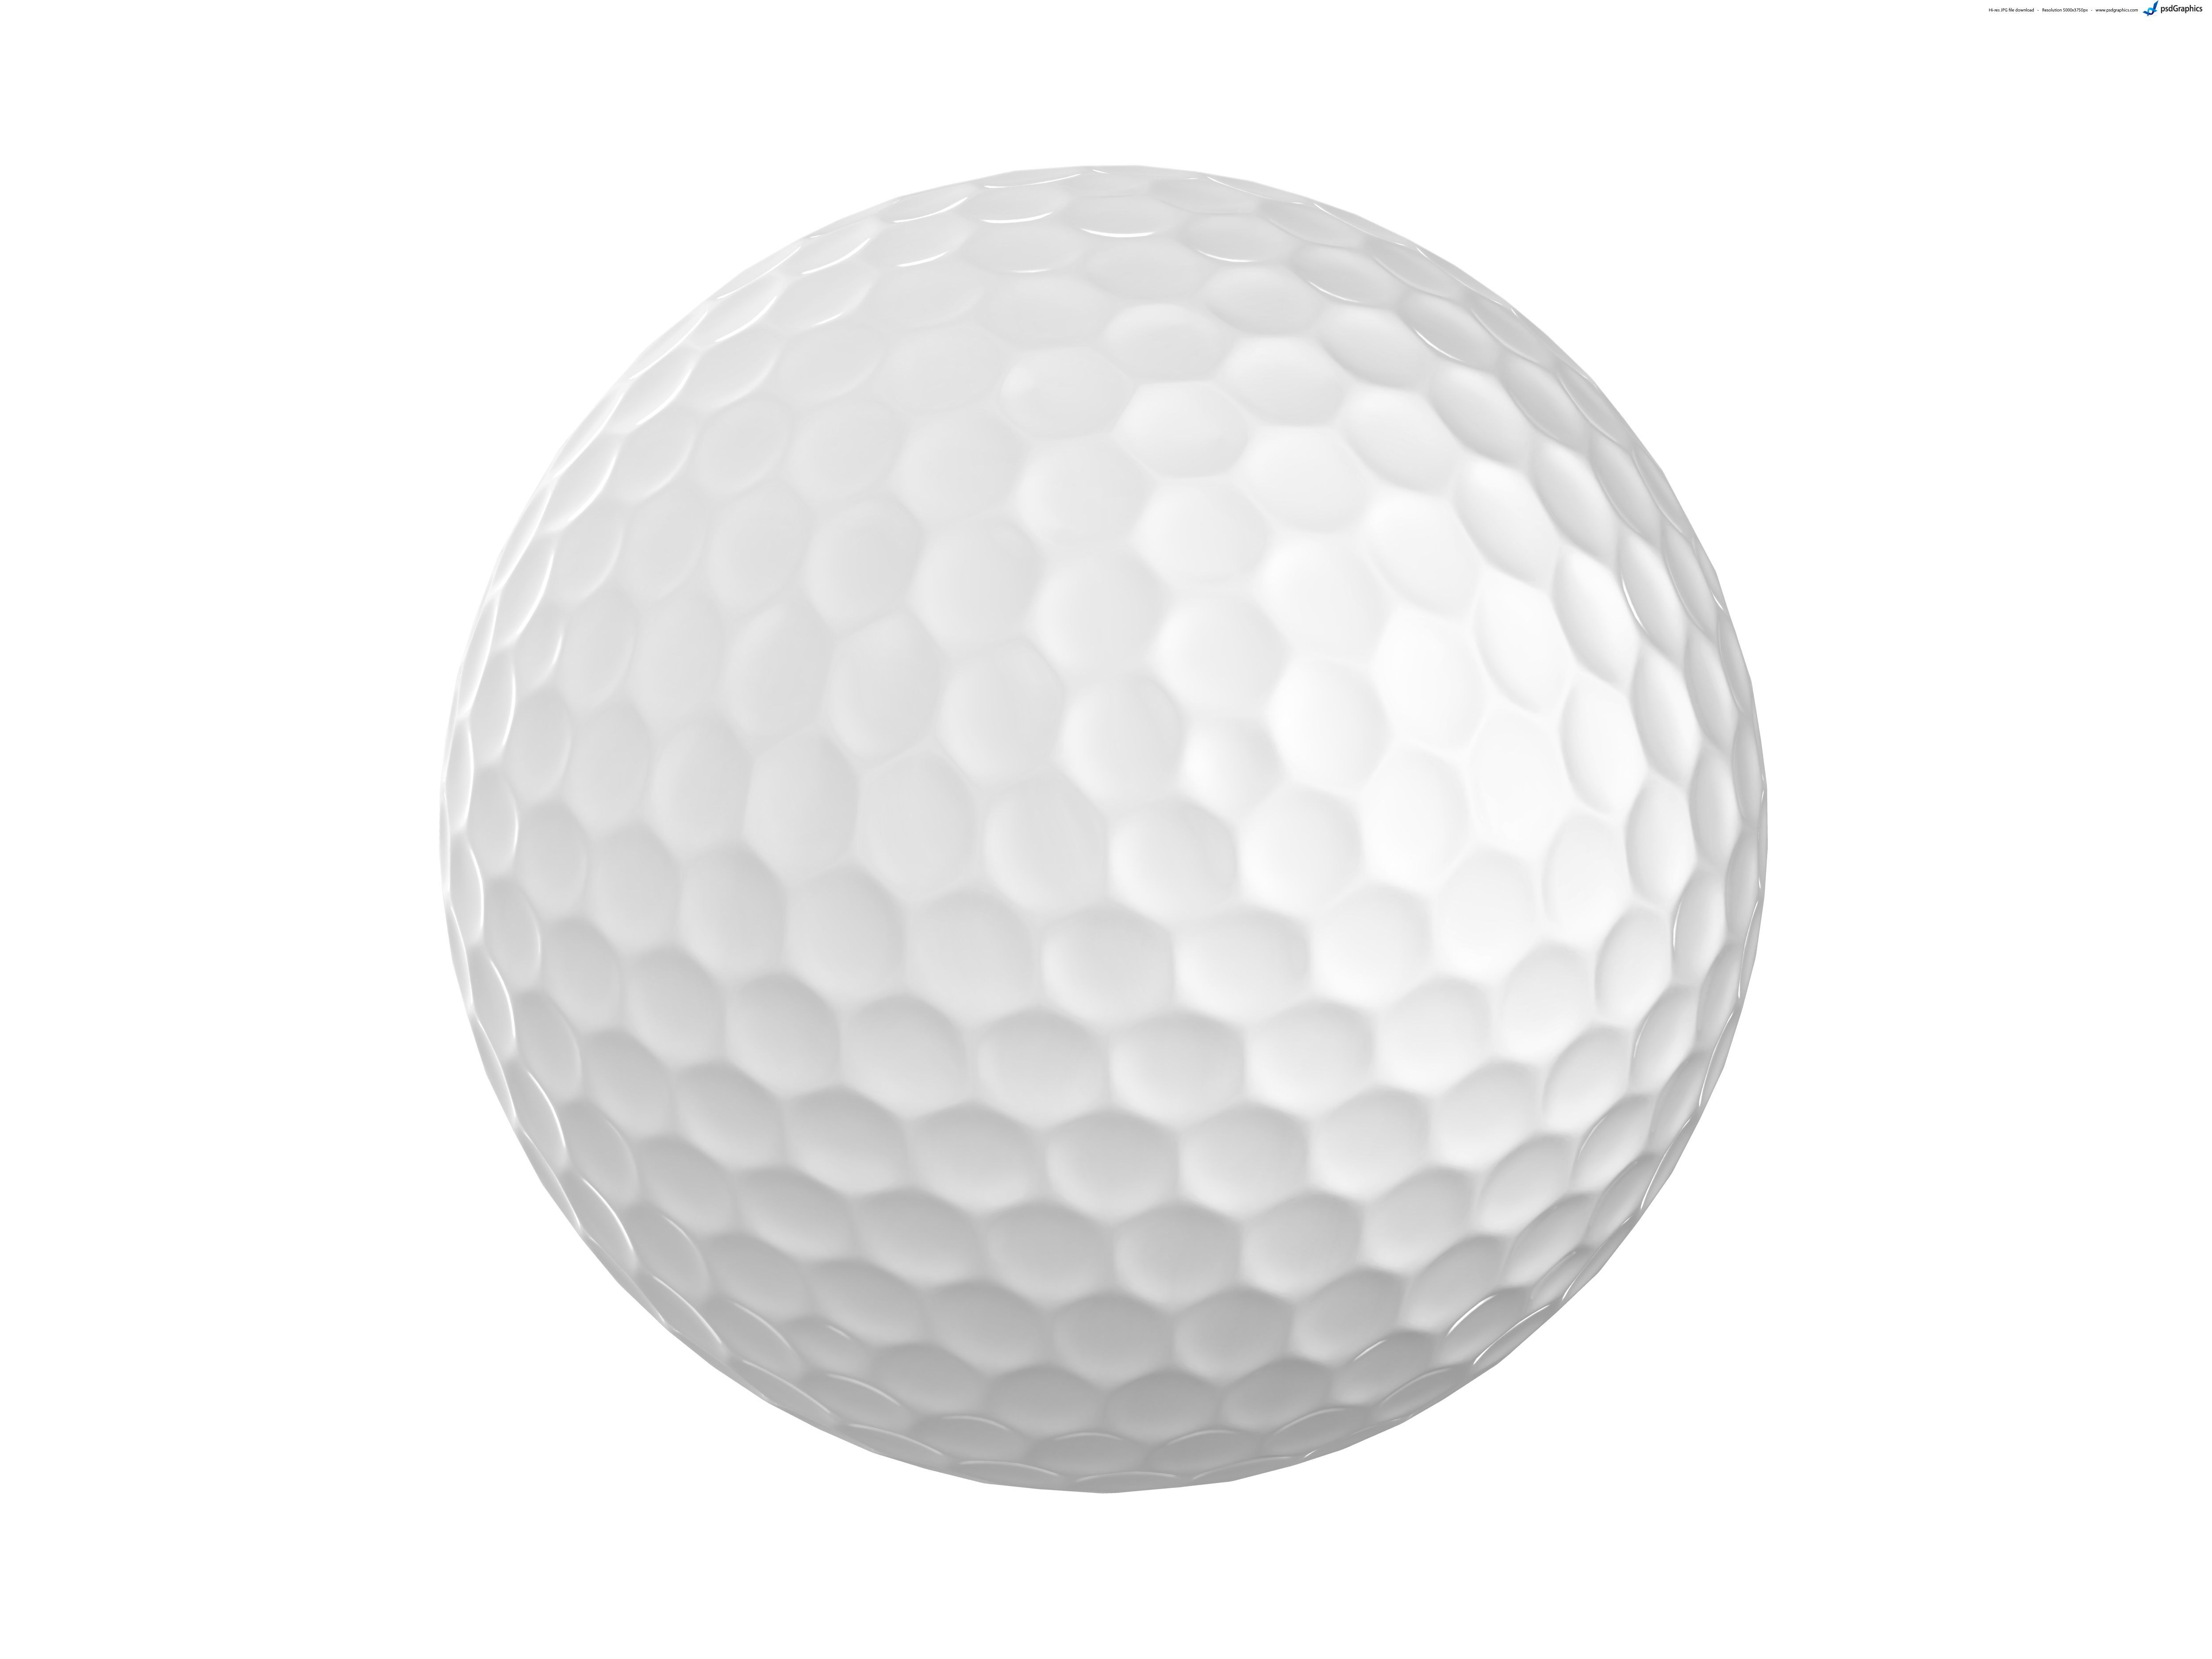 cool White Balls HD Picture. Golf, Golf ball, Golf tips driving